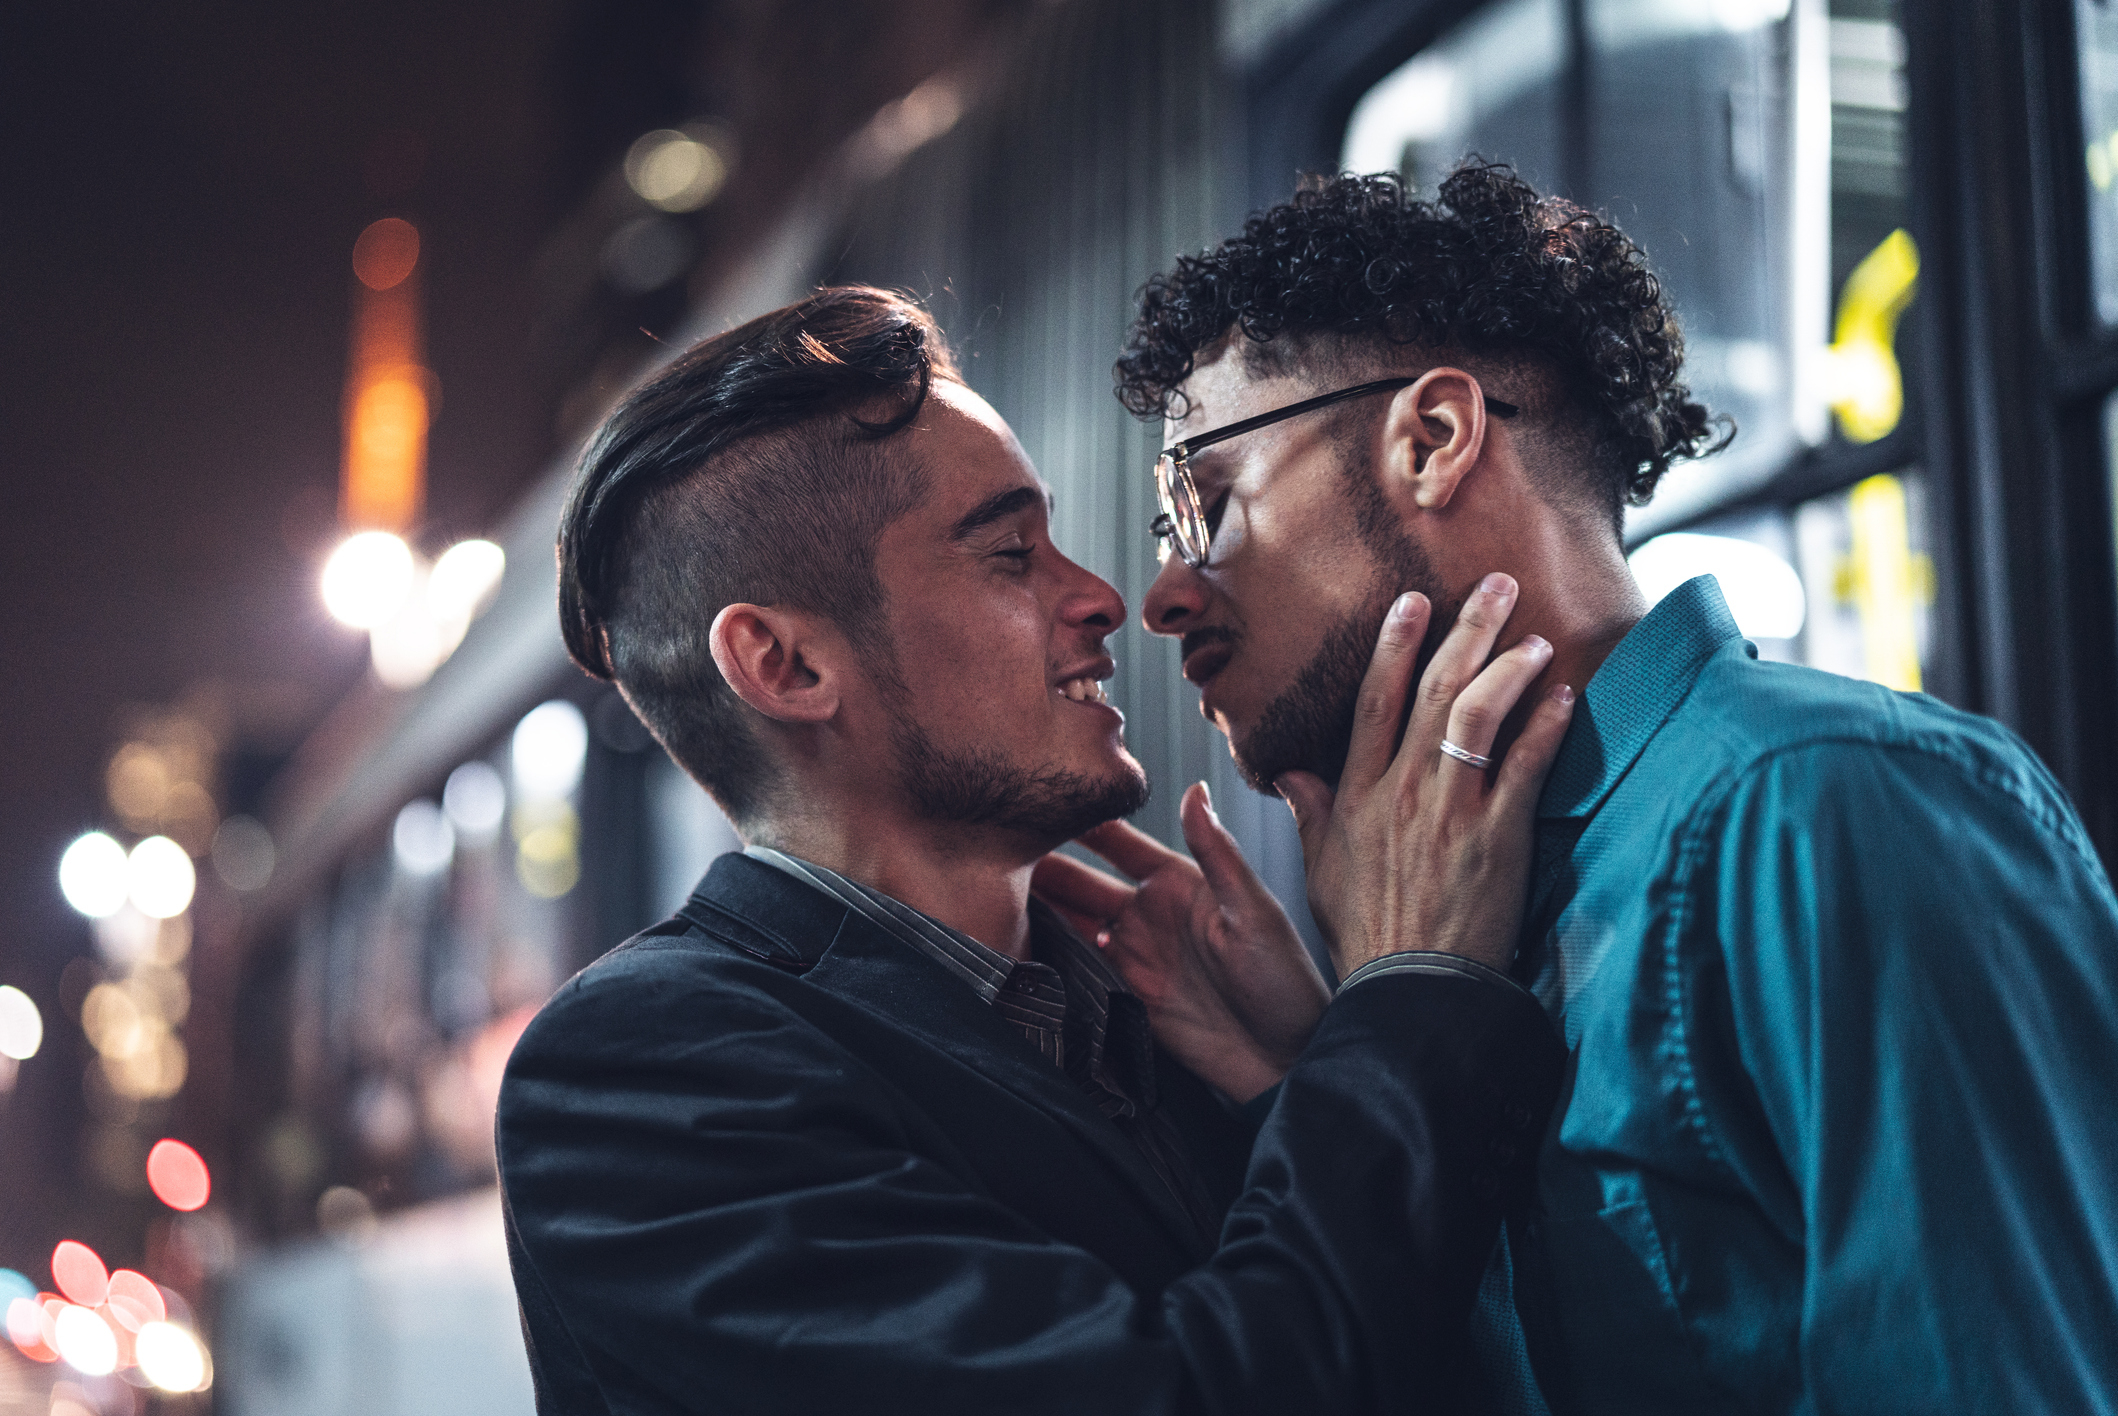 Two people embracing and touching foreheads affectionately at night, with city lights in the background